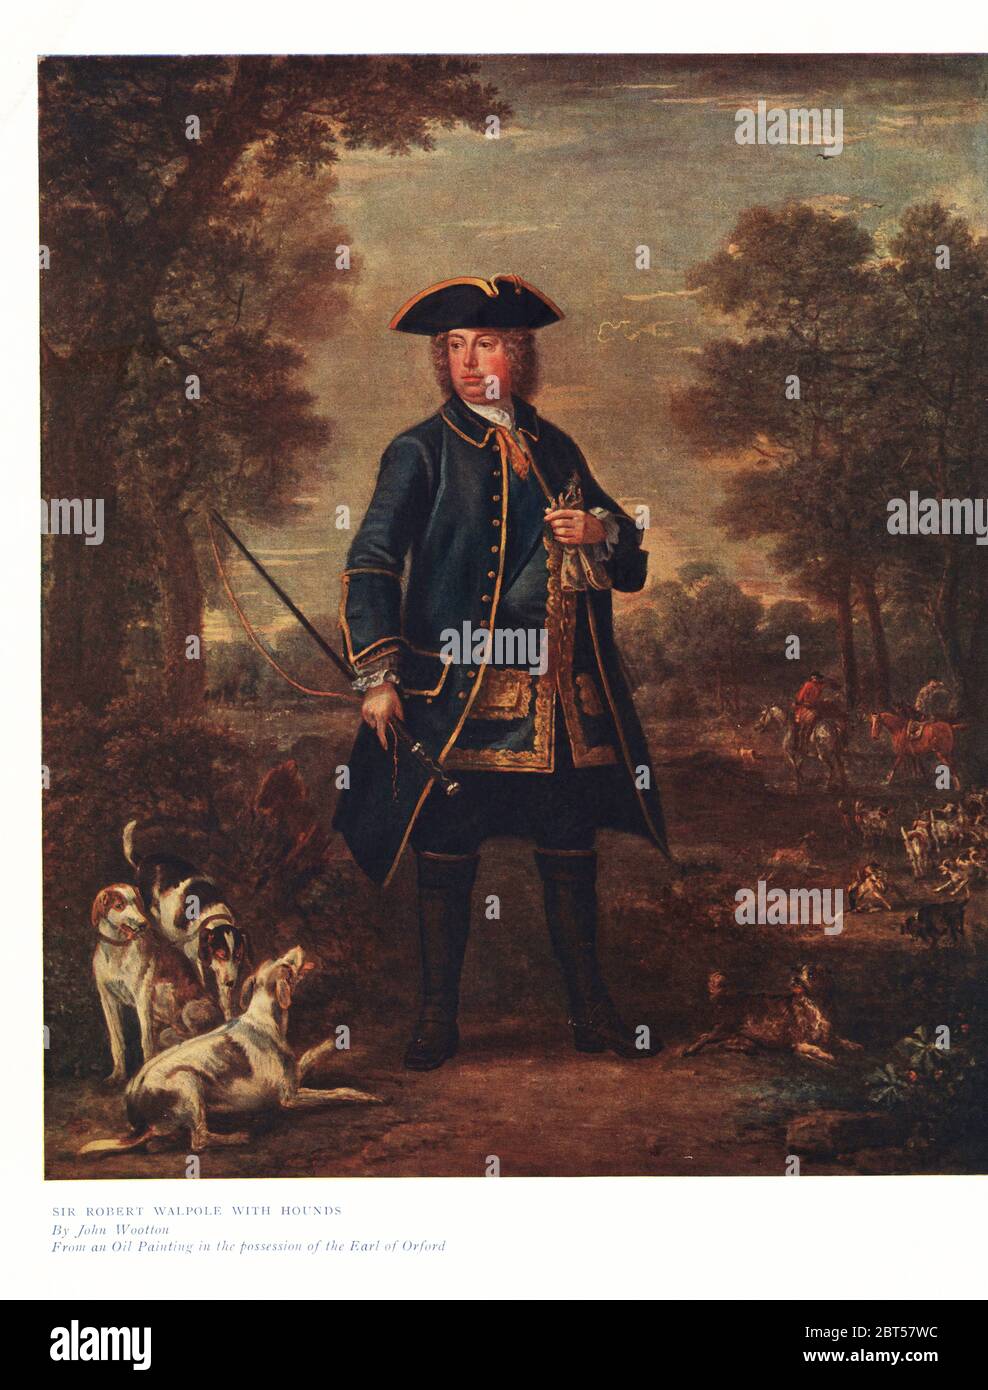 Sir Robert Walpole with hounds, a fox hunt in the background. Color print from an illustration by John Wootton in Ralph Nevills Old Sporting Prints, The Connoisseur Magazine, London, 1908. Stock Photo